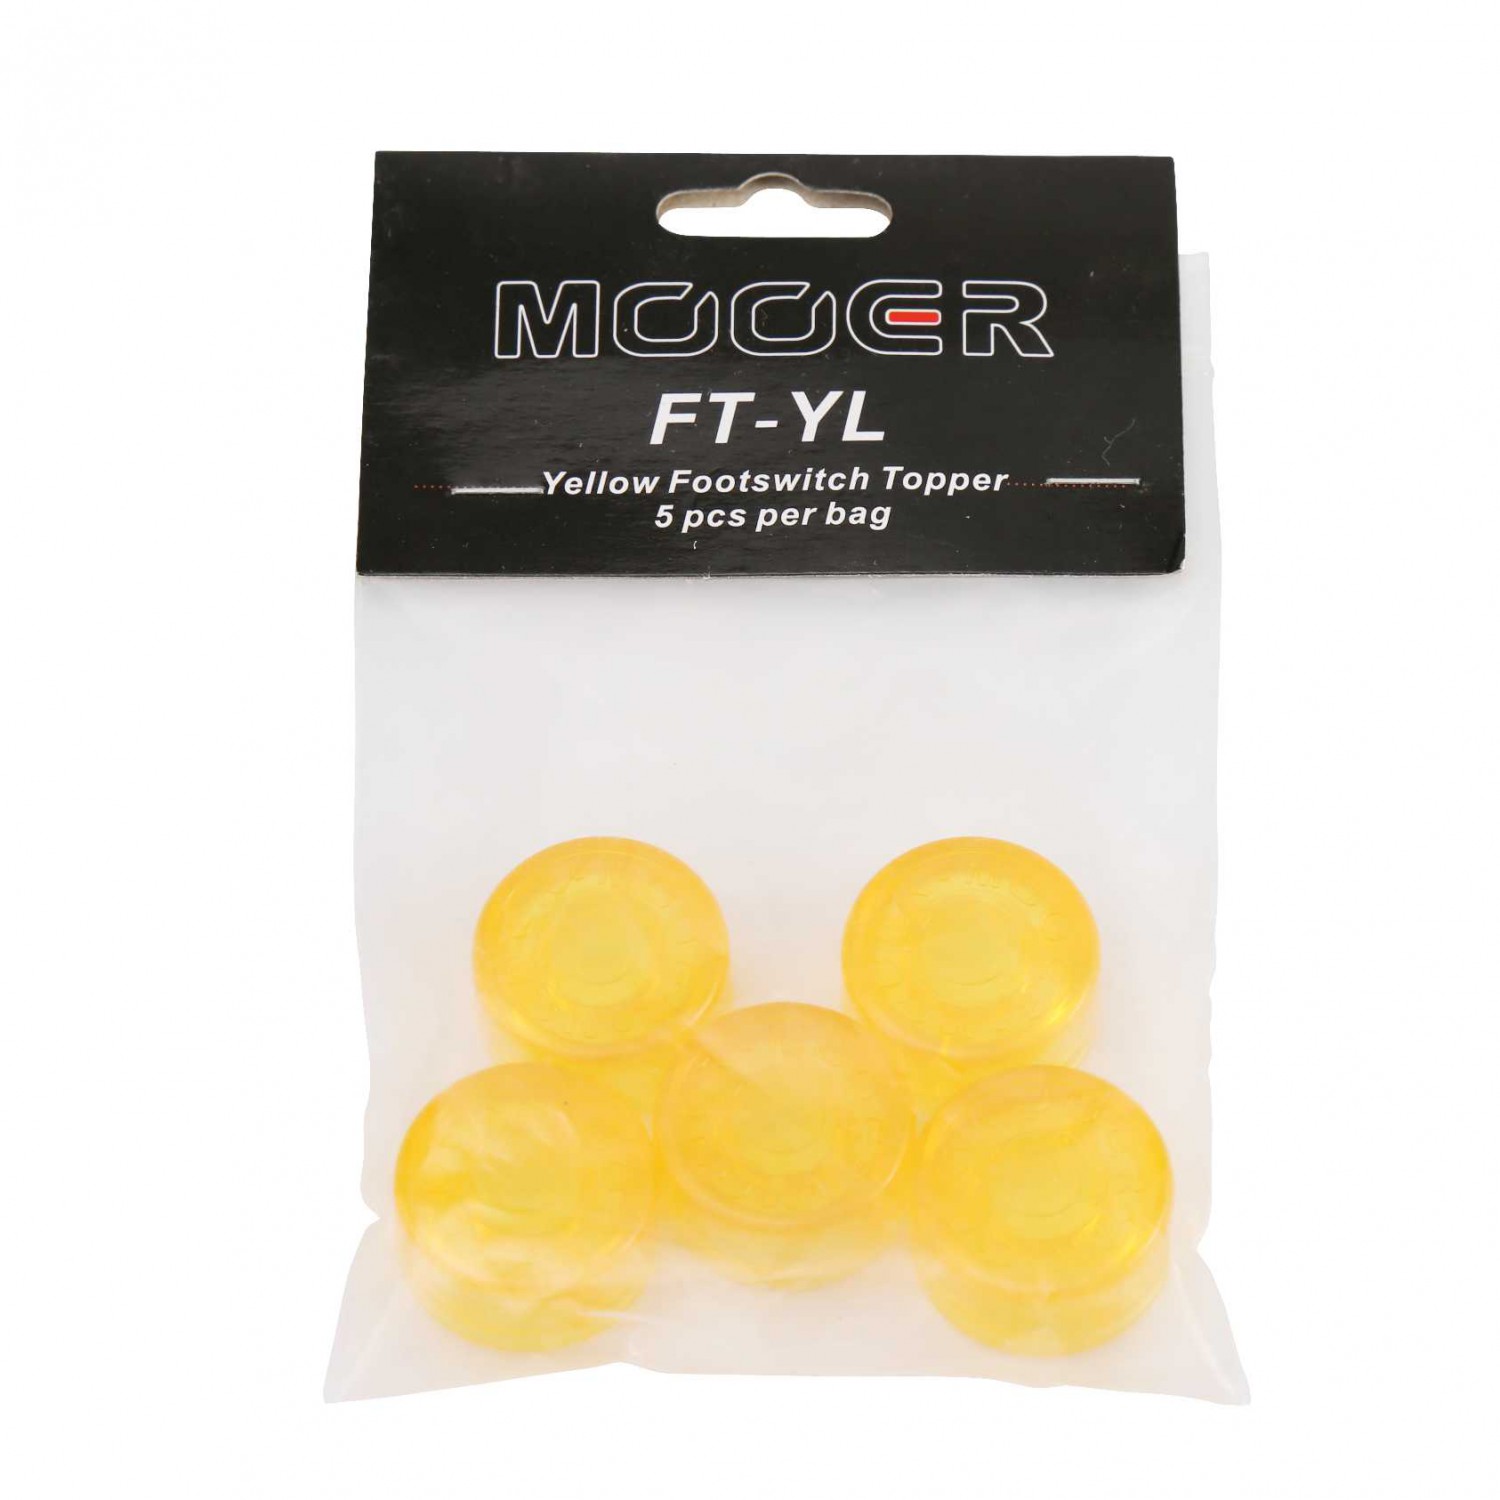 Mooer Candy Footswitch Topper, yellow, 5 pcs.